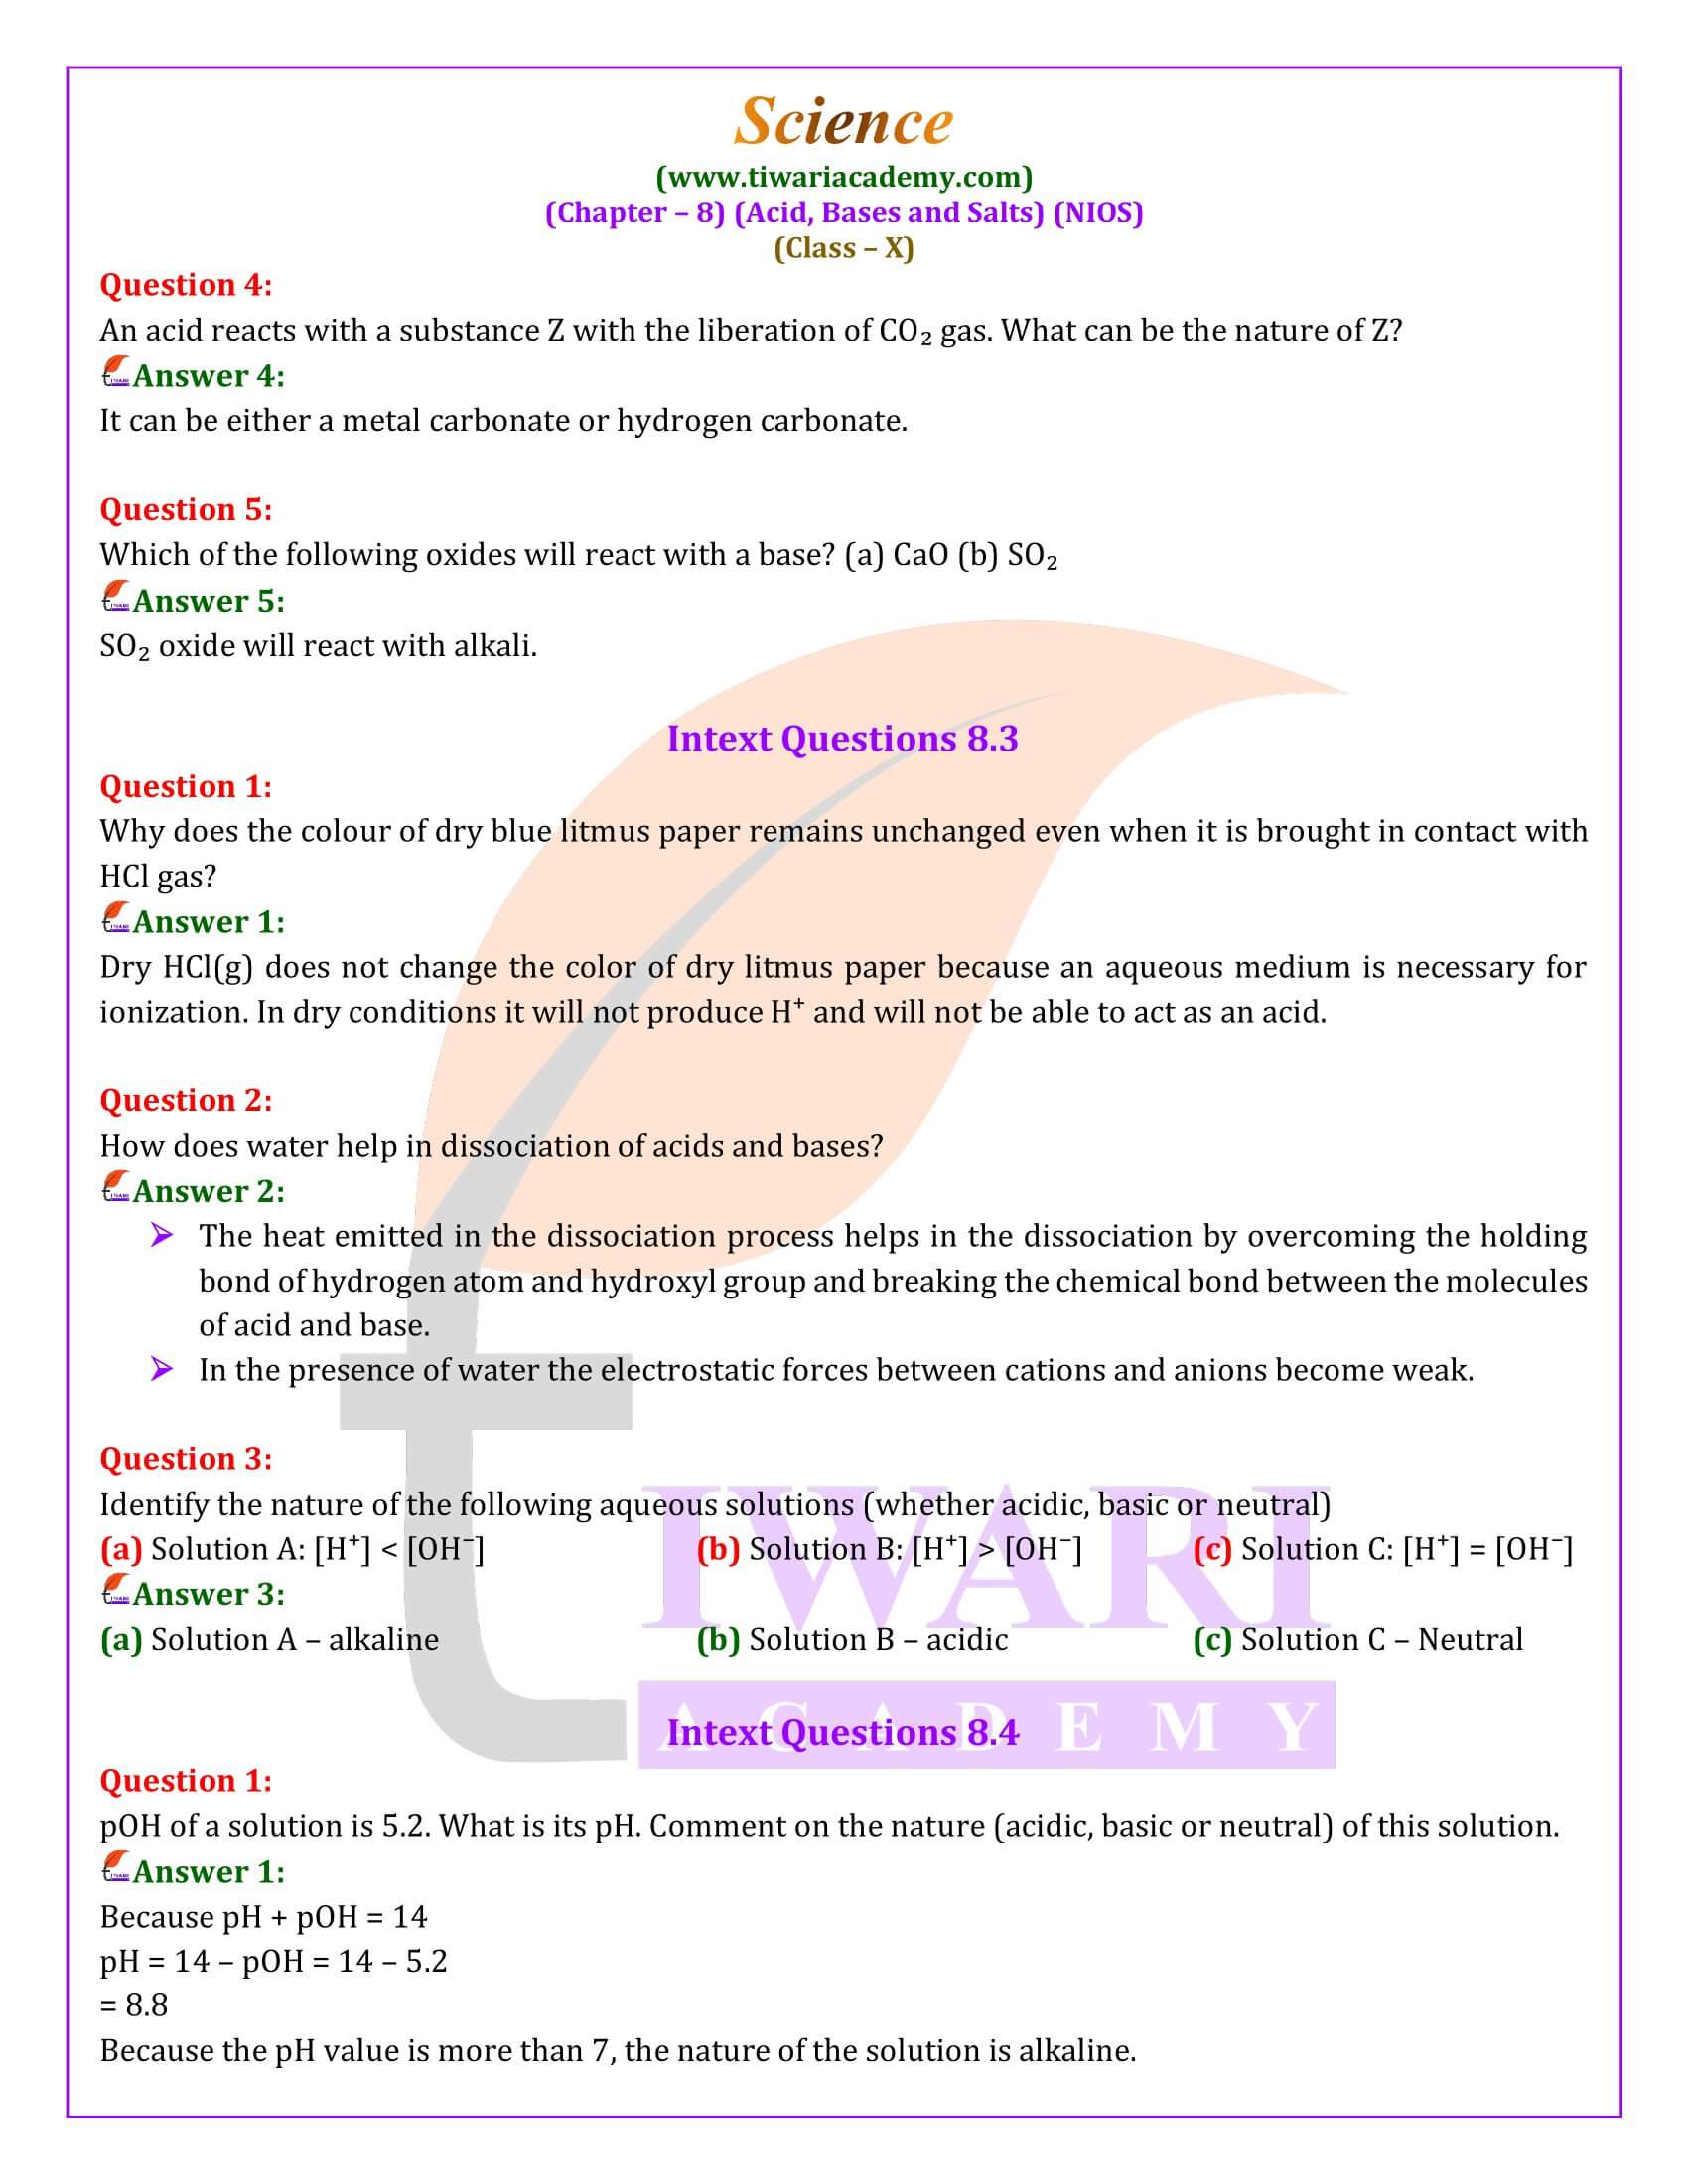 NIOS Class 10 Science Chapter 8 Acids, Bases and Salts Question Answers